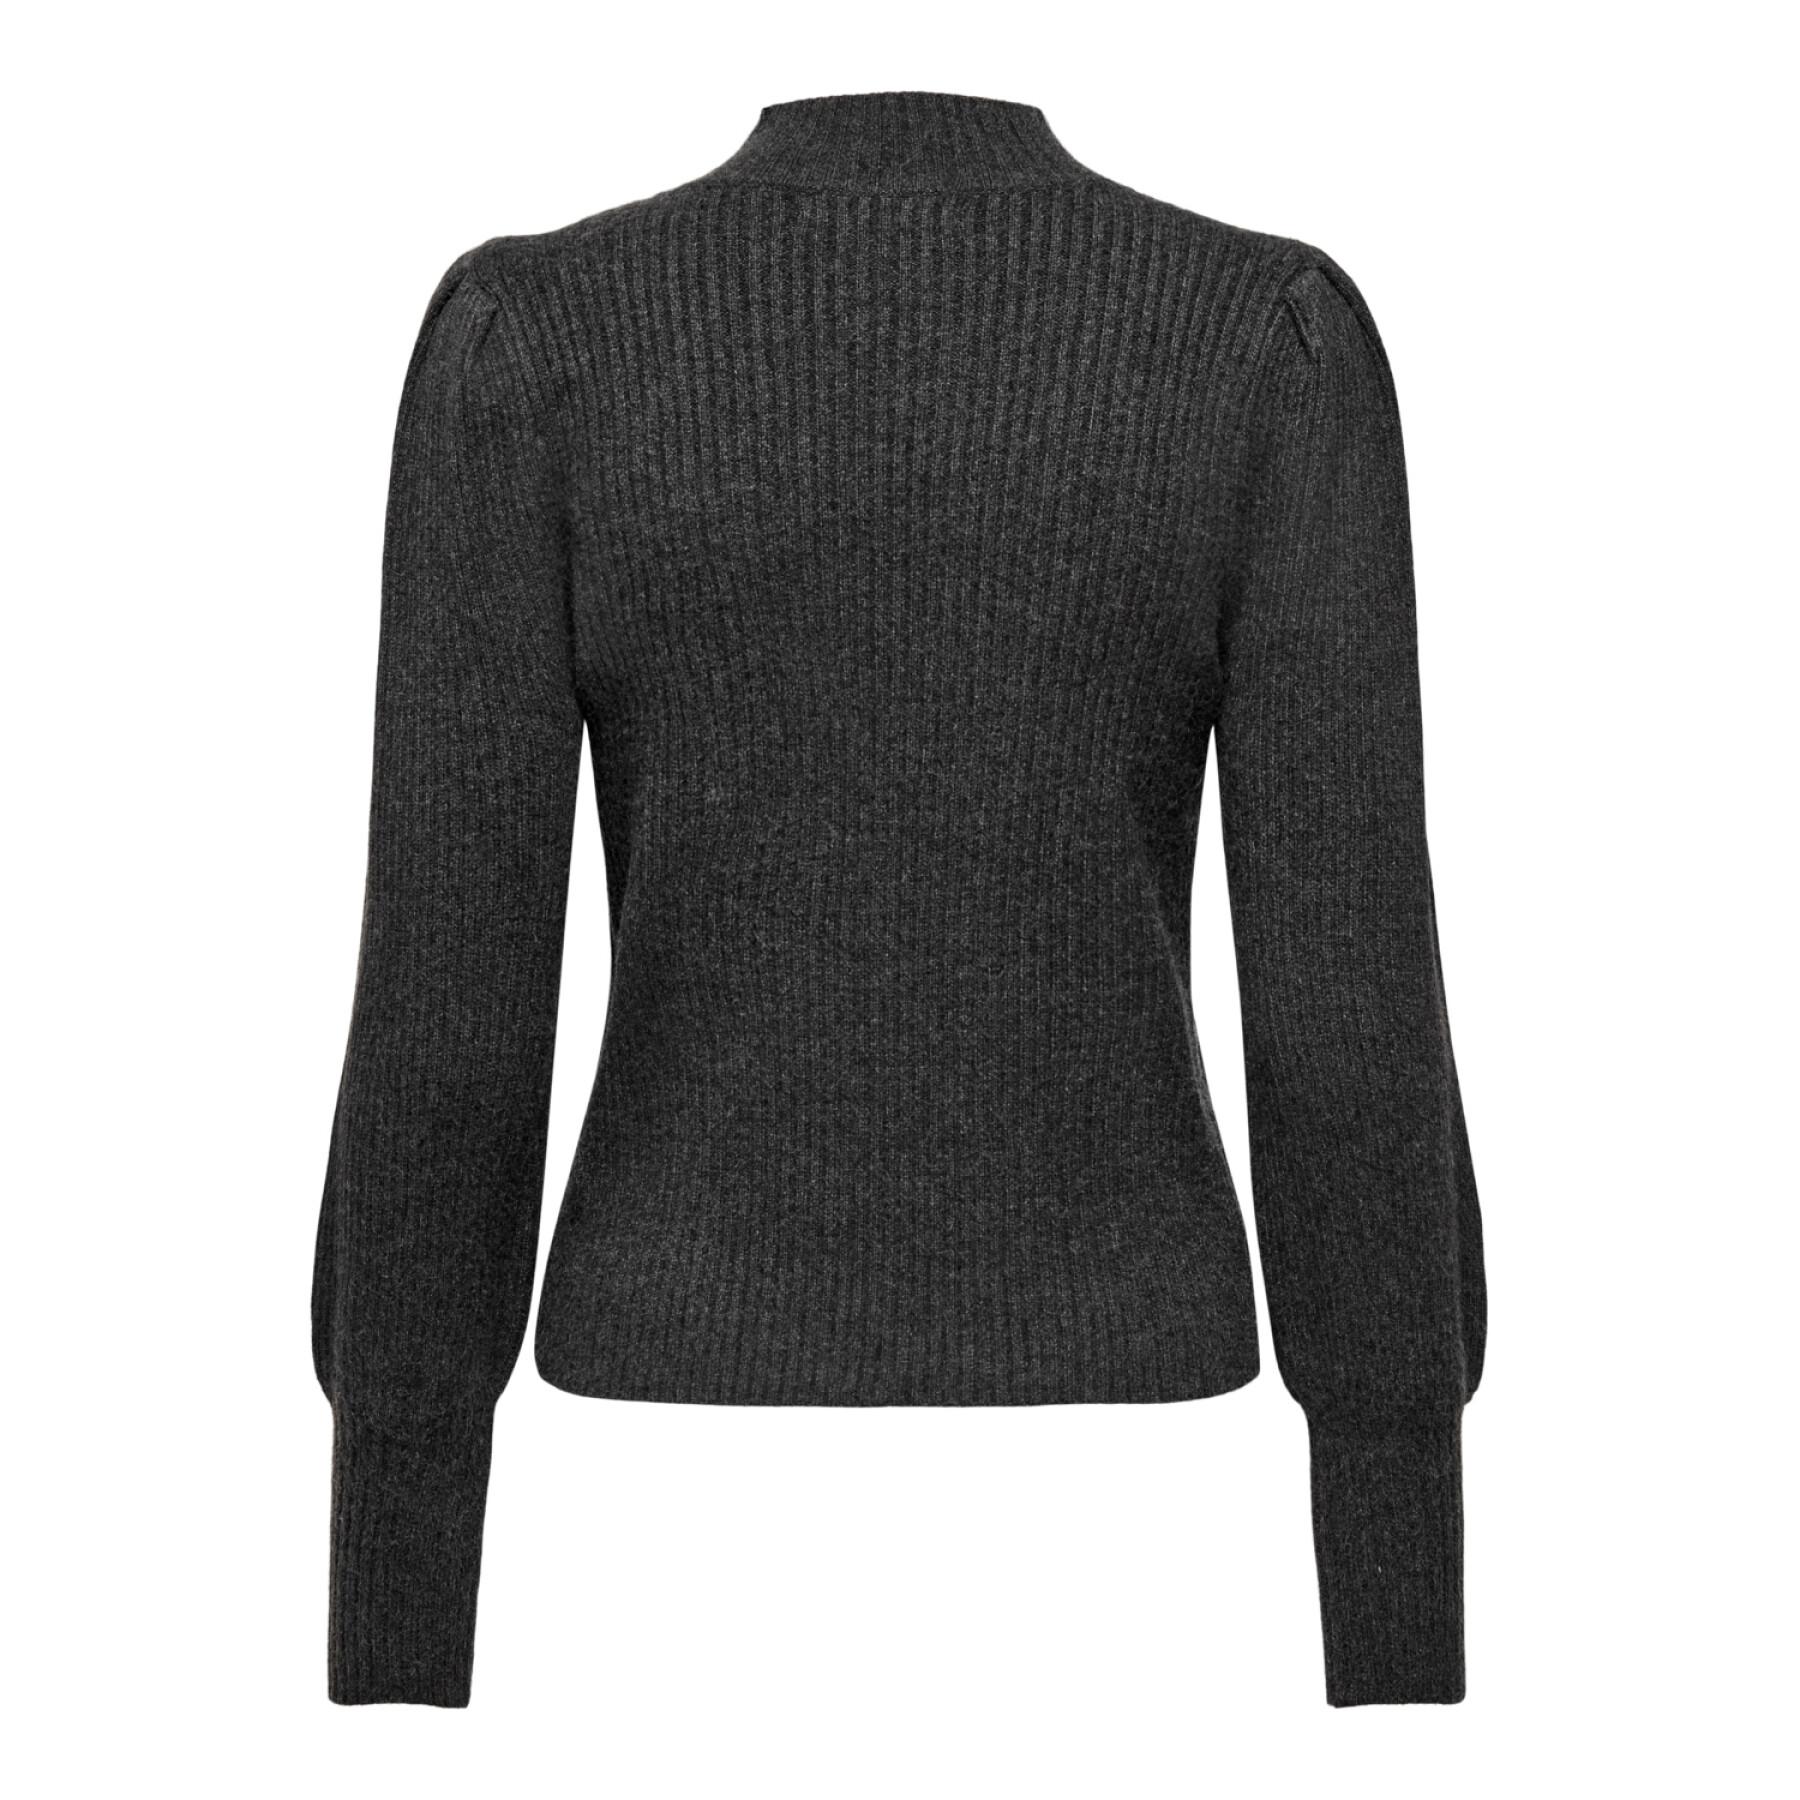 Women's knitted high neck sweater Only Katia